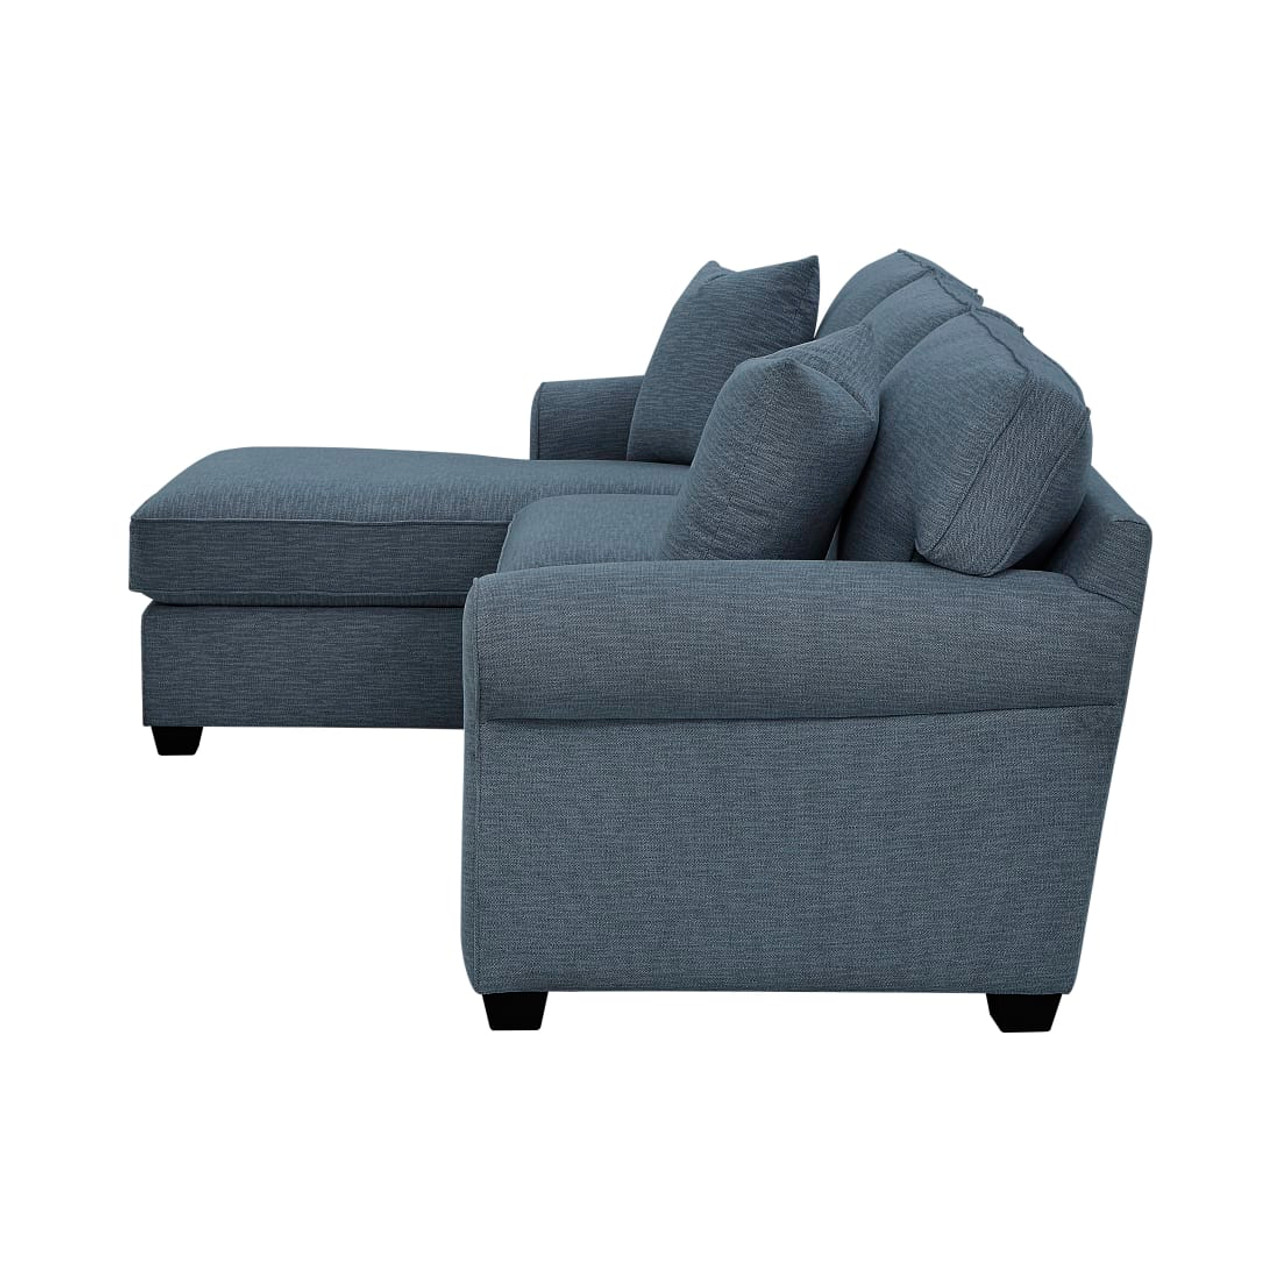 Crestview Rolled Arm Blue 2-pc sectional w/ left chaise